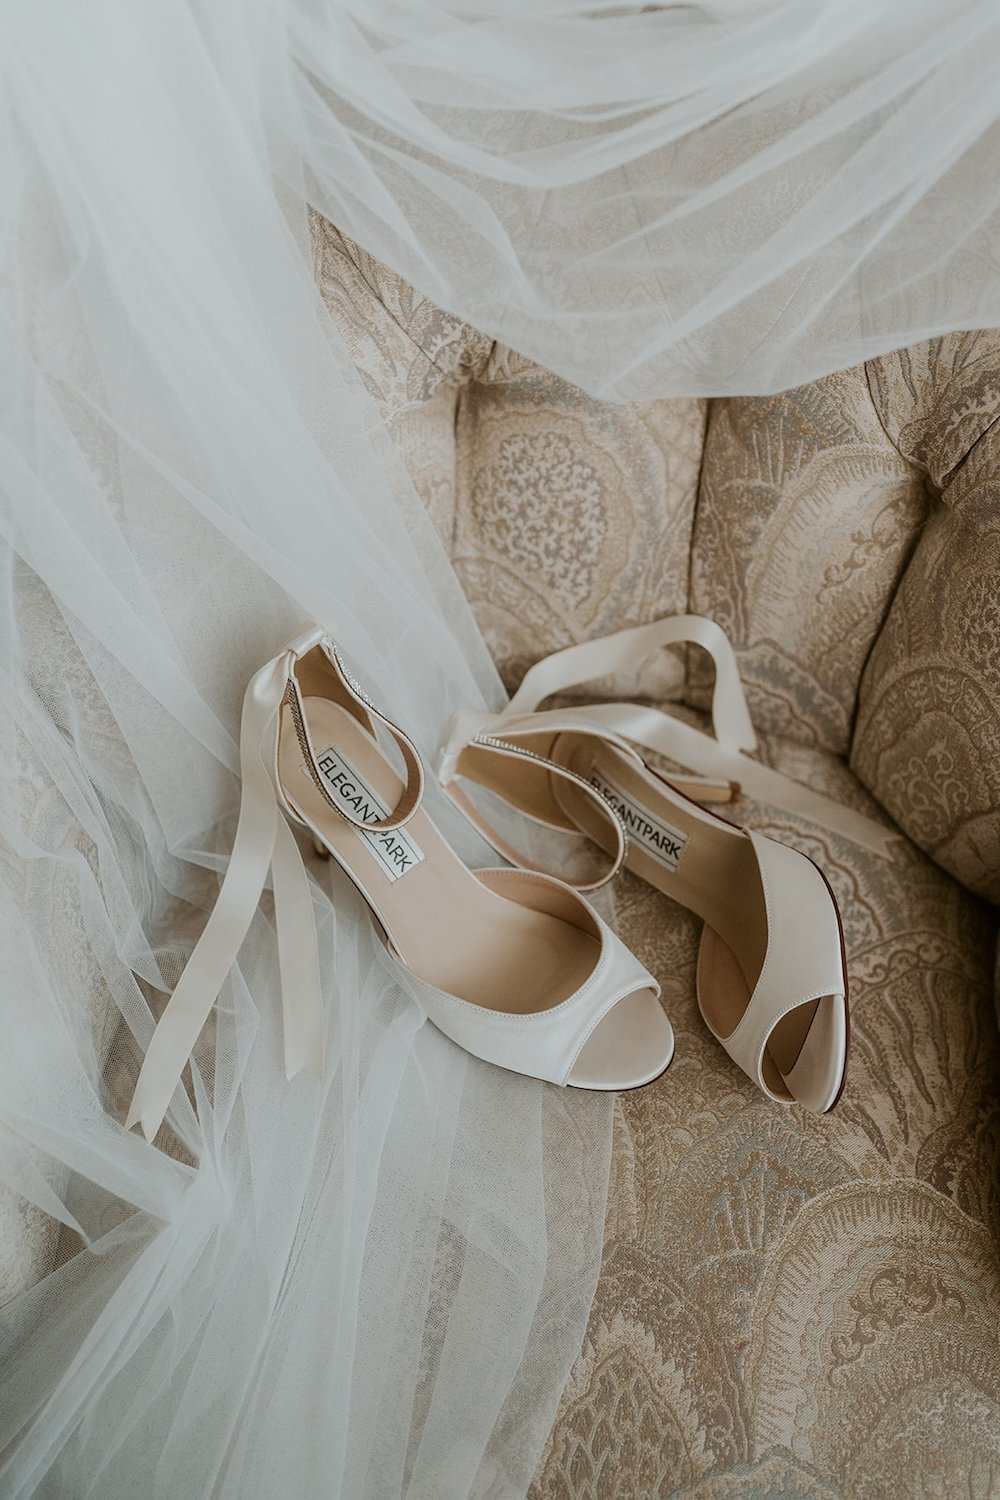 The brides heels resting on the chair with the veil decorated around them.